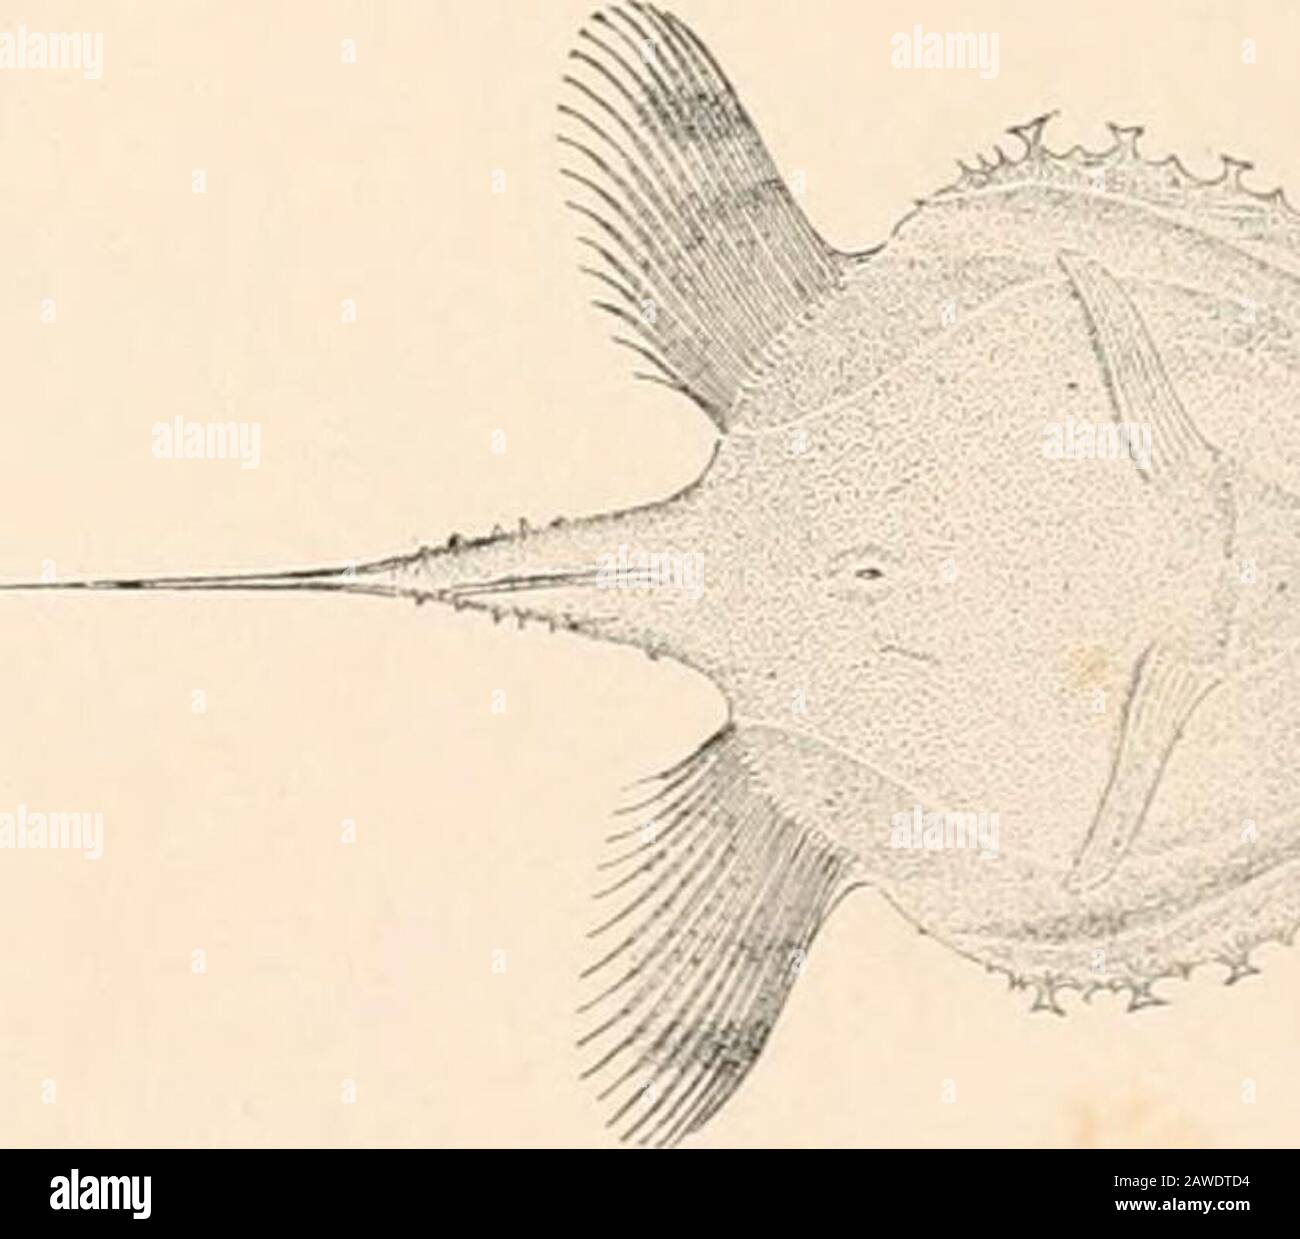 Oceanic ichthyology, a treatise on the deep-sea and pelagic fishes of the world, based chiefly upon the collections made by the steamers Blake, Albatross, and Fish Hawk in the northwestern Atlantic, with an atlas containing 417 figures . - 1 v&gt; v, % 114(1. ; 1146 • -nn , 413 DlBRAMiirs ATLANTIC!. S. p. 501.) 413a,b. IlALIElTELLA LAPPA. (p. 500.) m„»nc rn mi 4Ut( &. llM.Il.LTK IITIIYS ALLLLATIS. (p. 0U4.) GOODE AND BEAN— OCEAN IC ICHTHYOLOGY. PLATE CXXIII Stock Photo